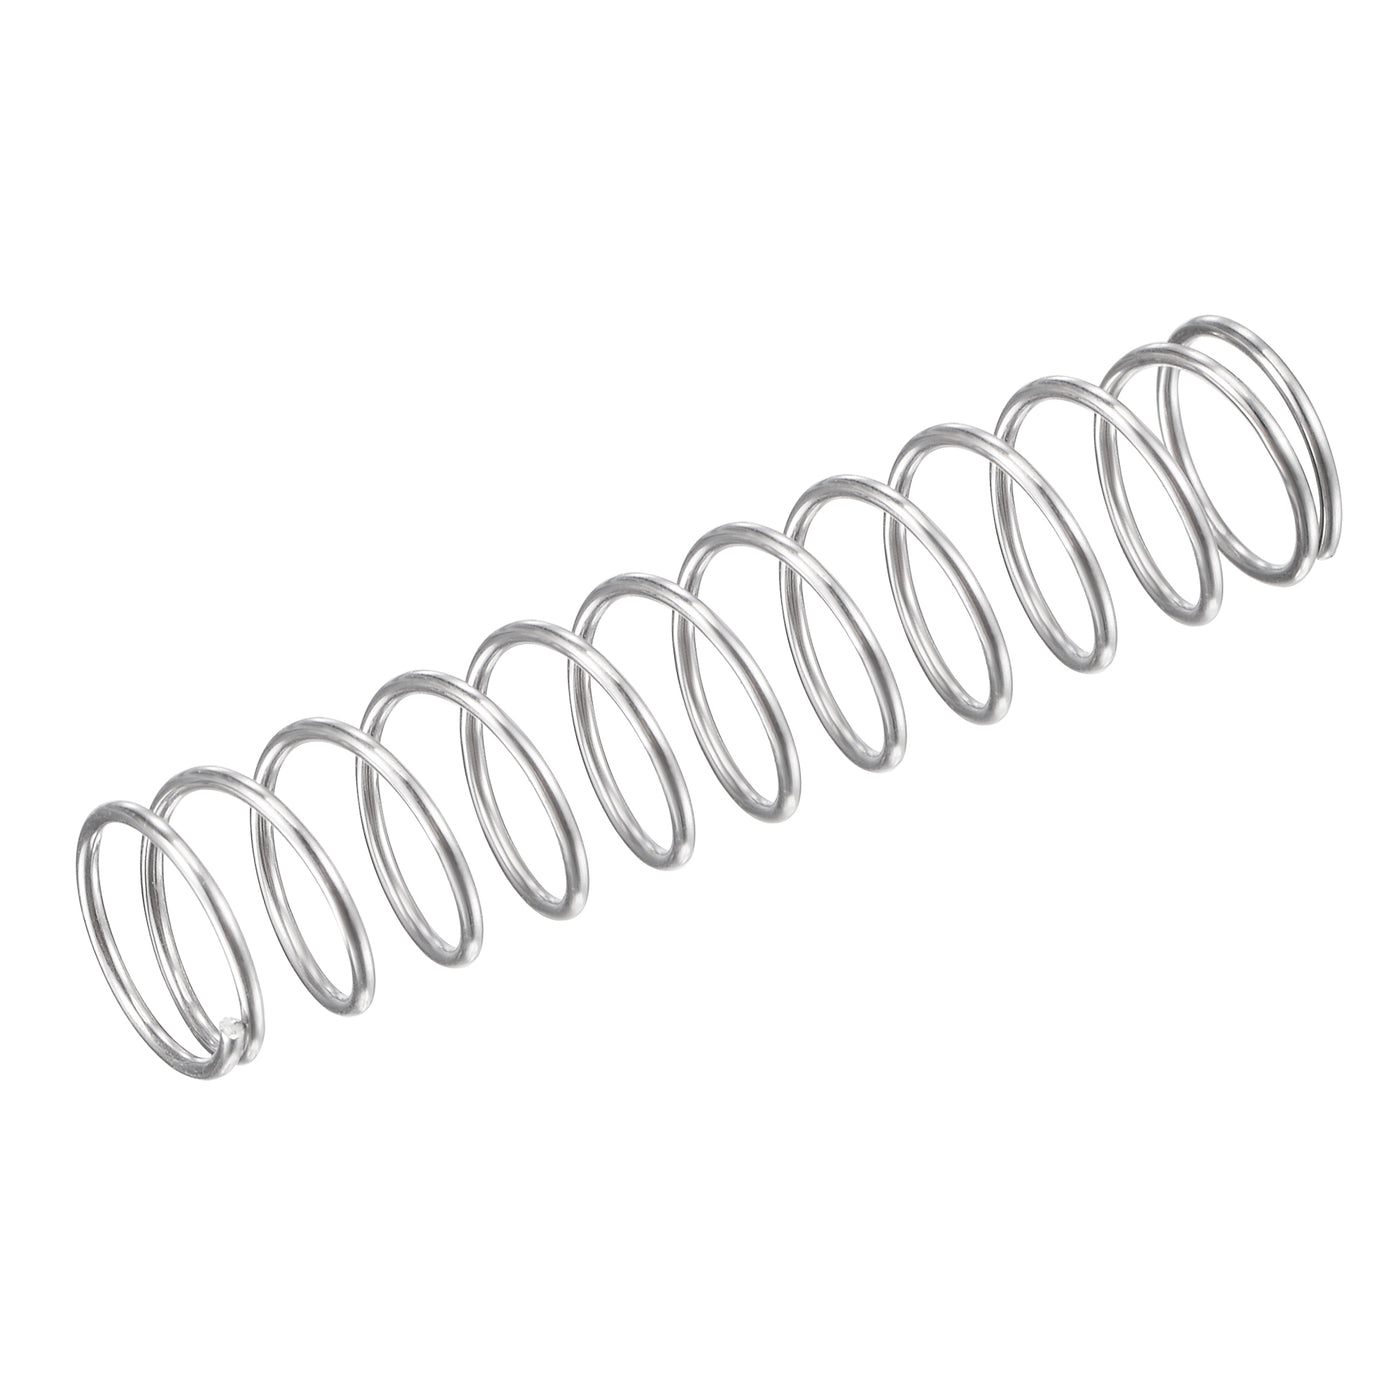 uxcell Uxcell 11mmx0.9mmx50mm 304 Stainless Steel Compression Spring 11N Load Capacity 10pcs